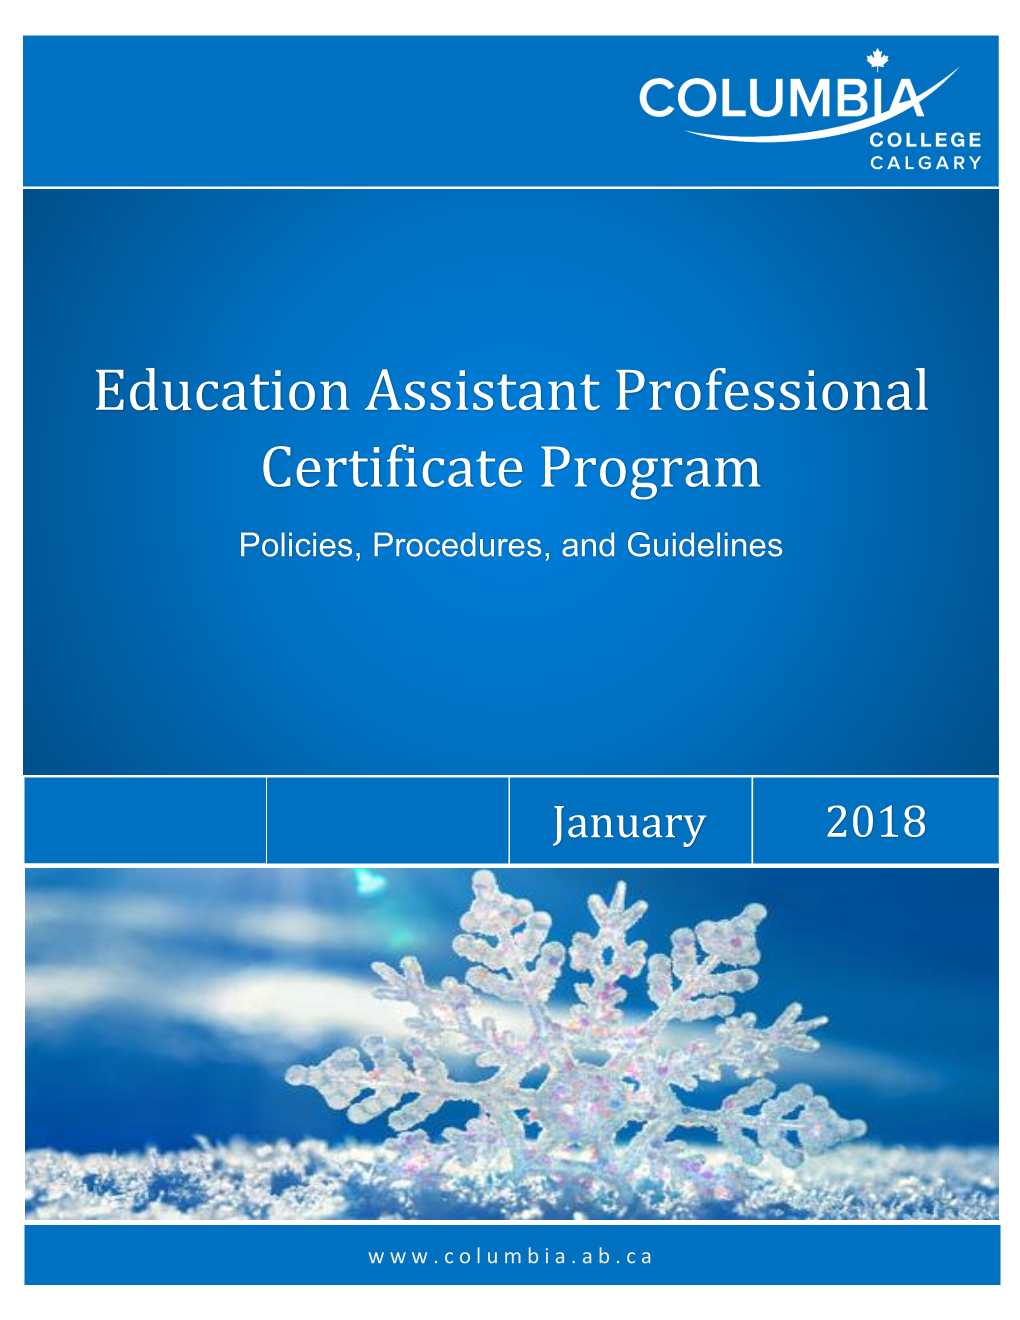 Education Assistant Professional Certificate Program Policies, Procedures, and Guidelines